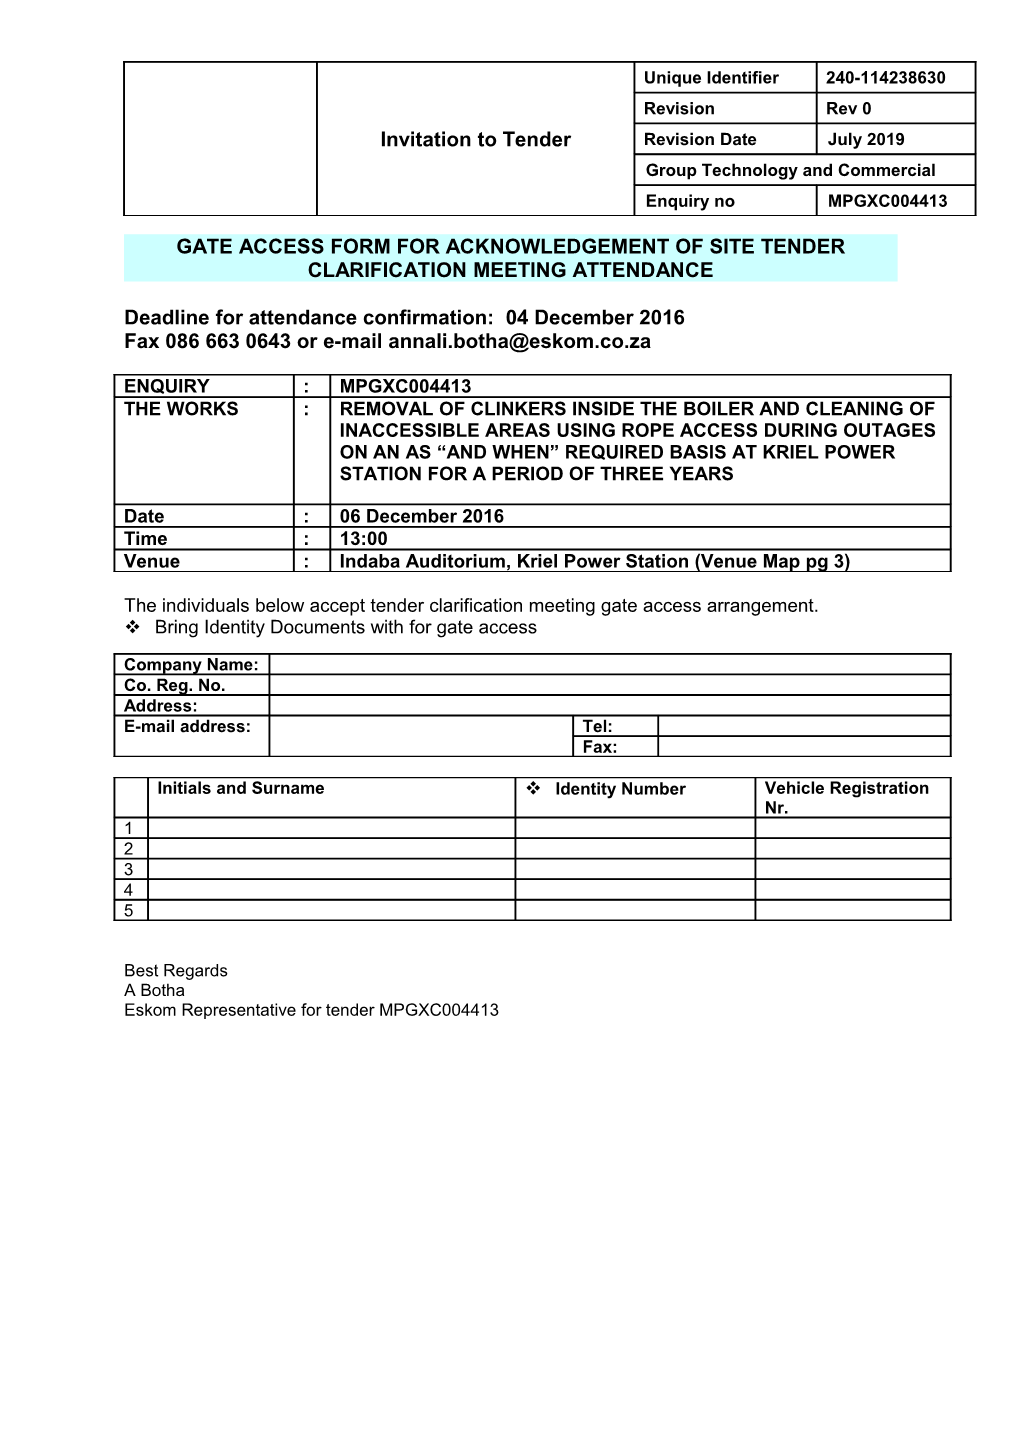 Gate Access Form for Acknowledgement of Site Tender Clarification Meeting Attendance